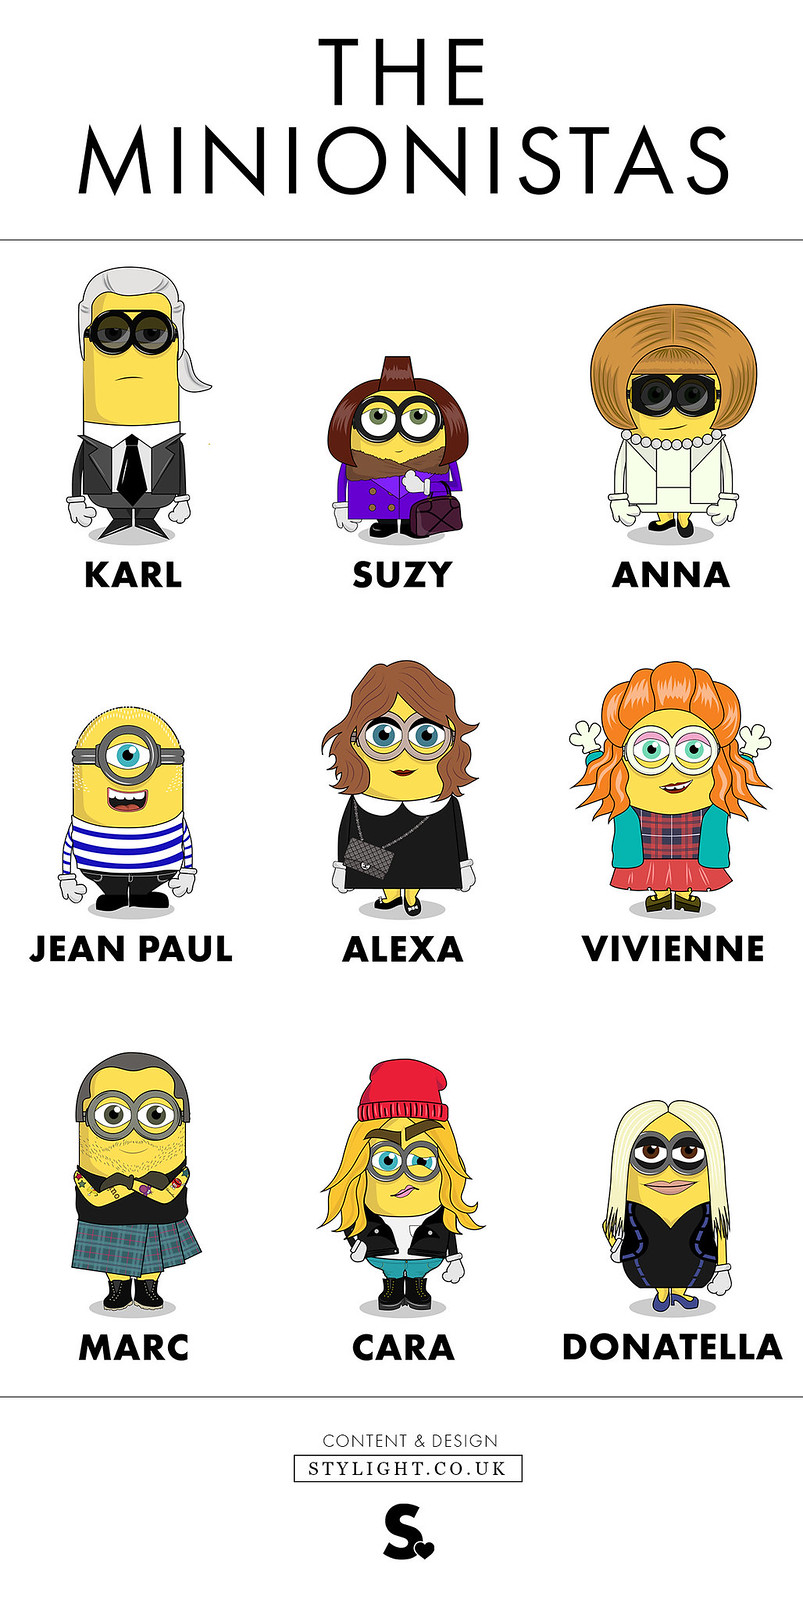 'The Minionistas' - The Minions get a high fashion makeover